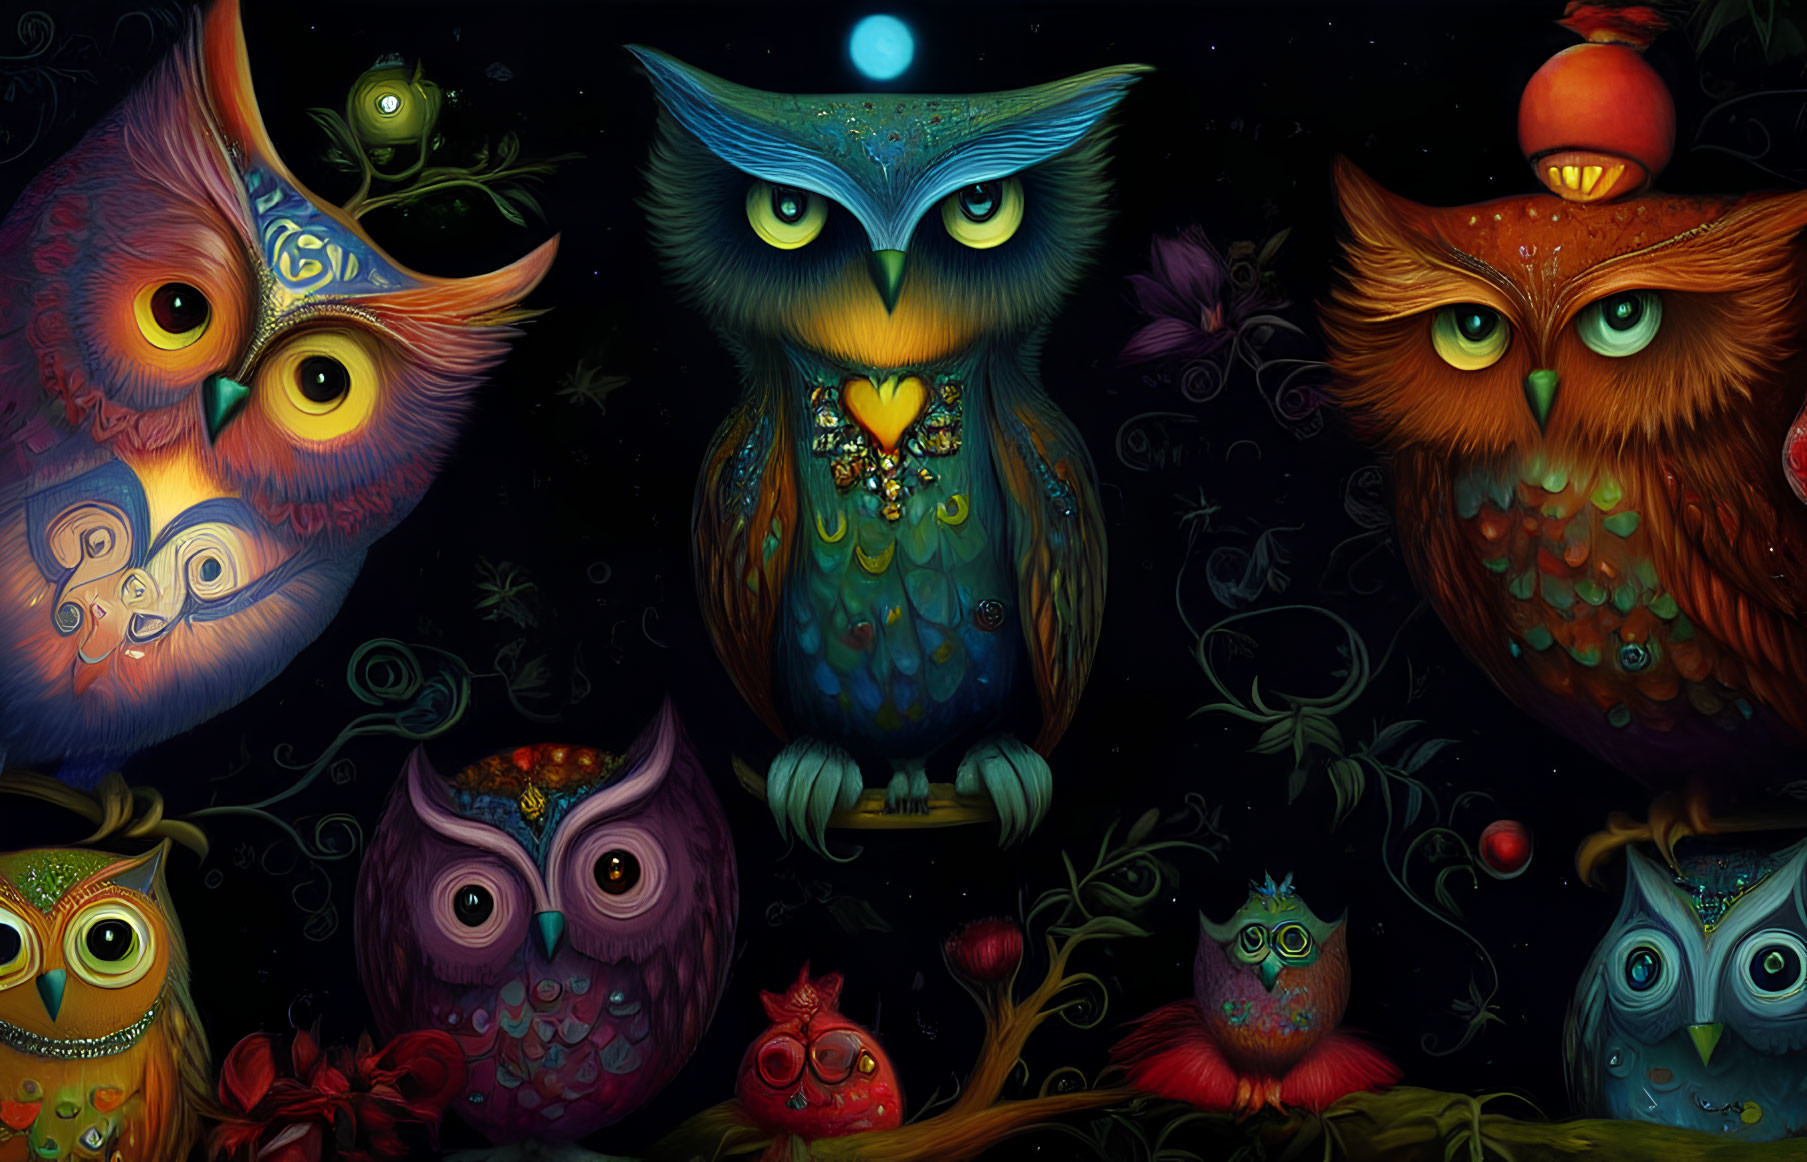 Vibrant owl illustration with intricate feather patterns and whimsical setting